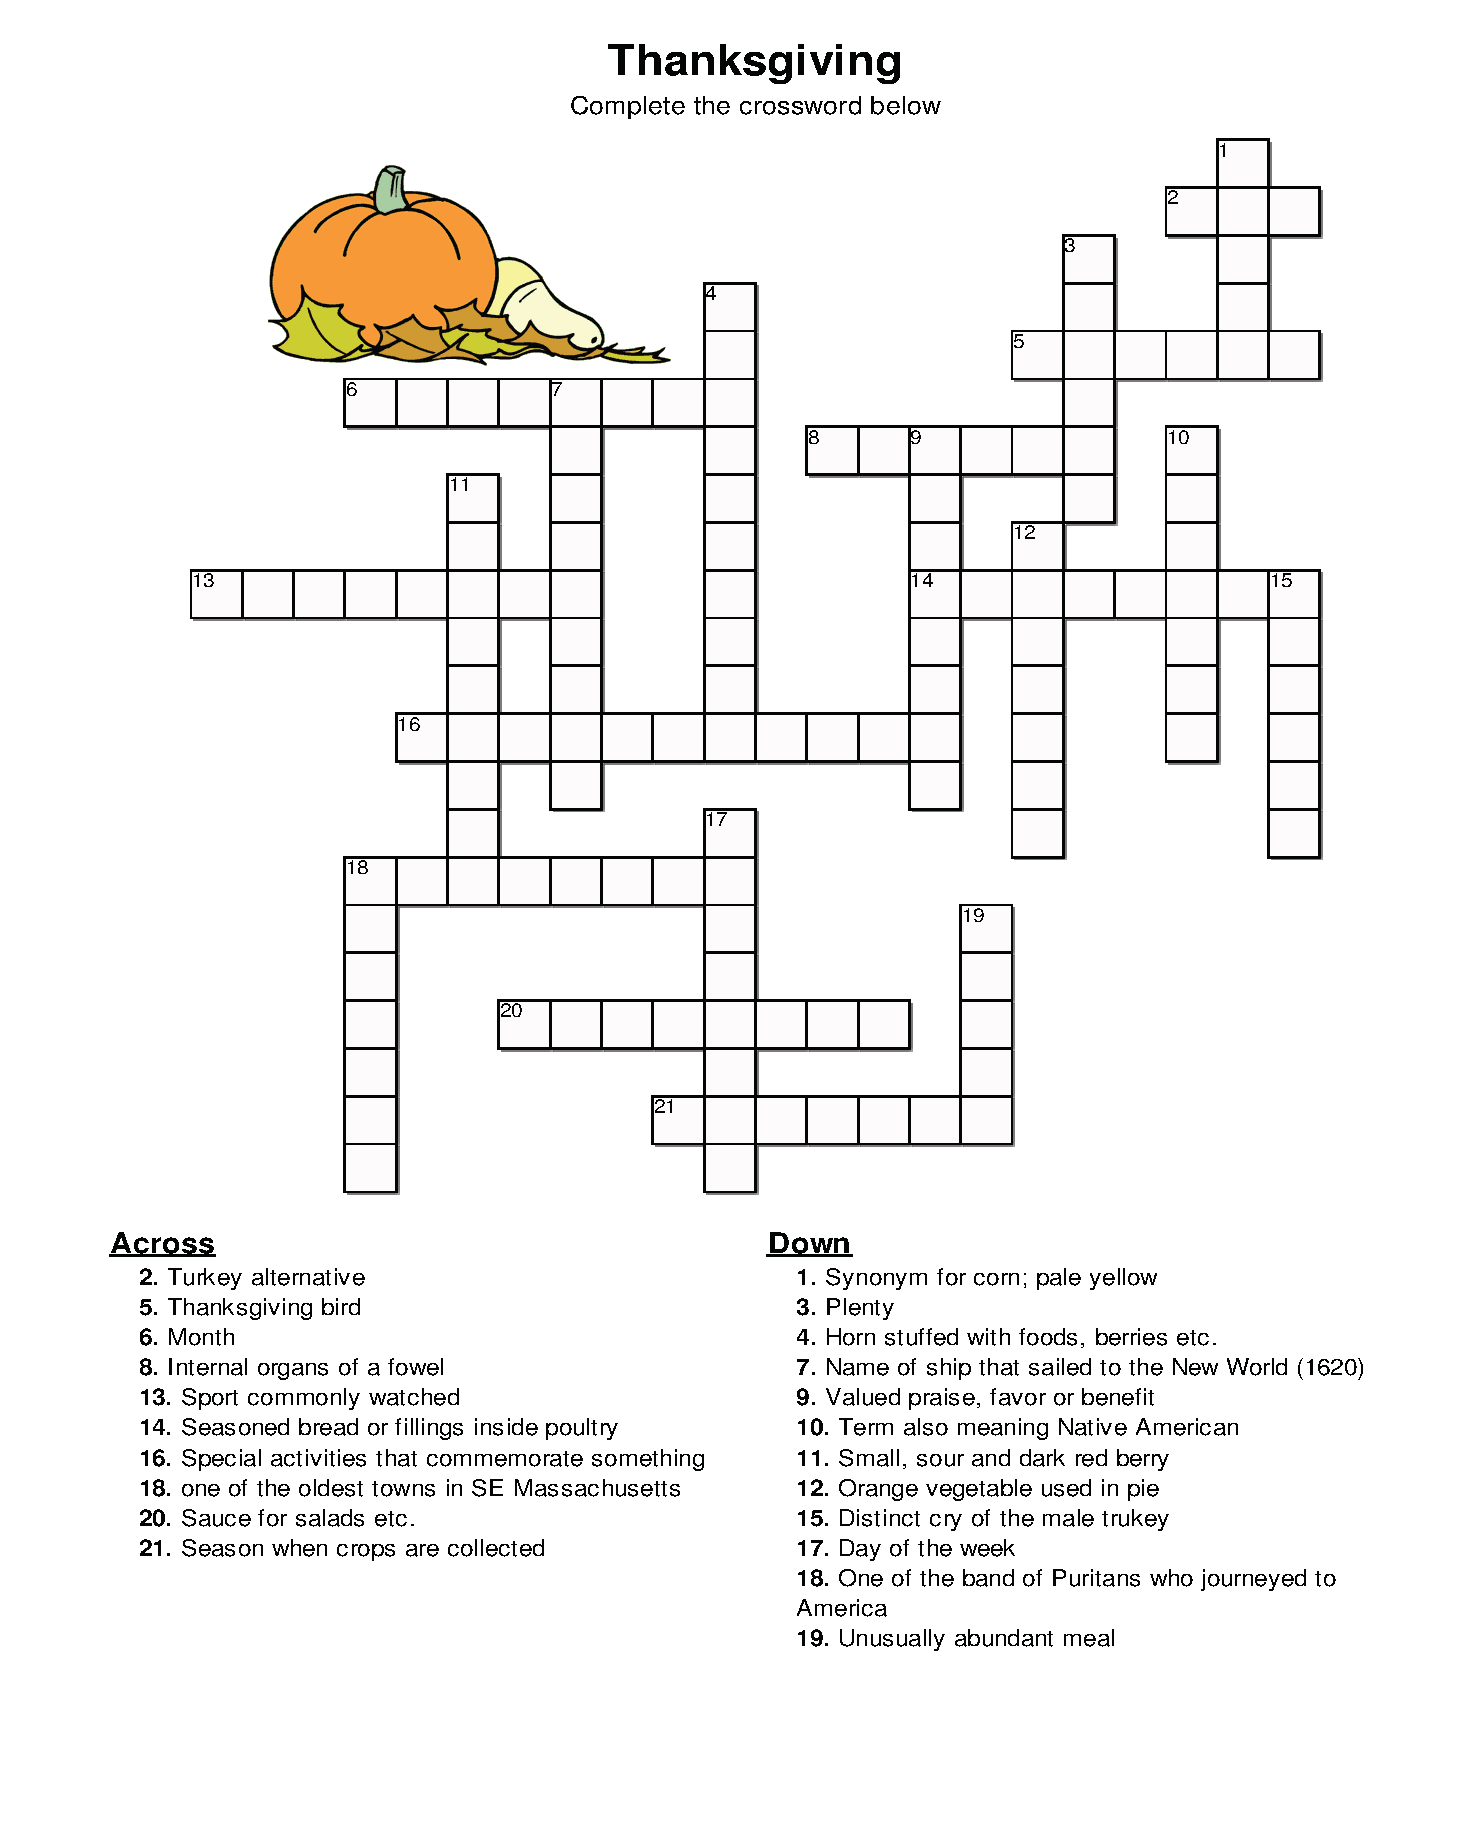 Download Thanksgiving Crossword Puzzle - Best Coloring Pages For Kids